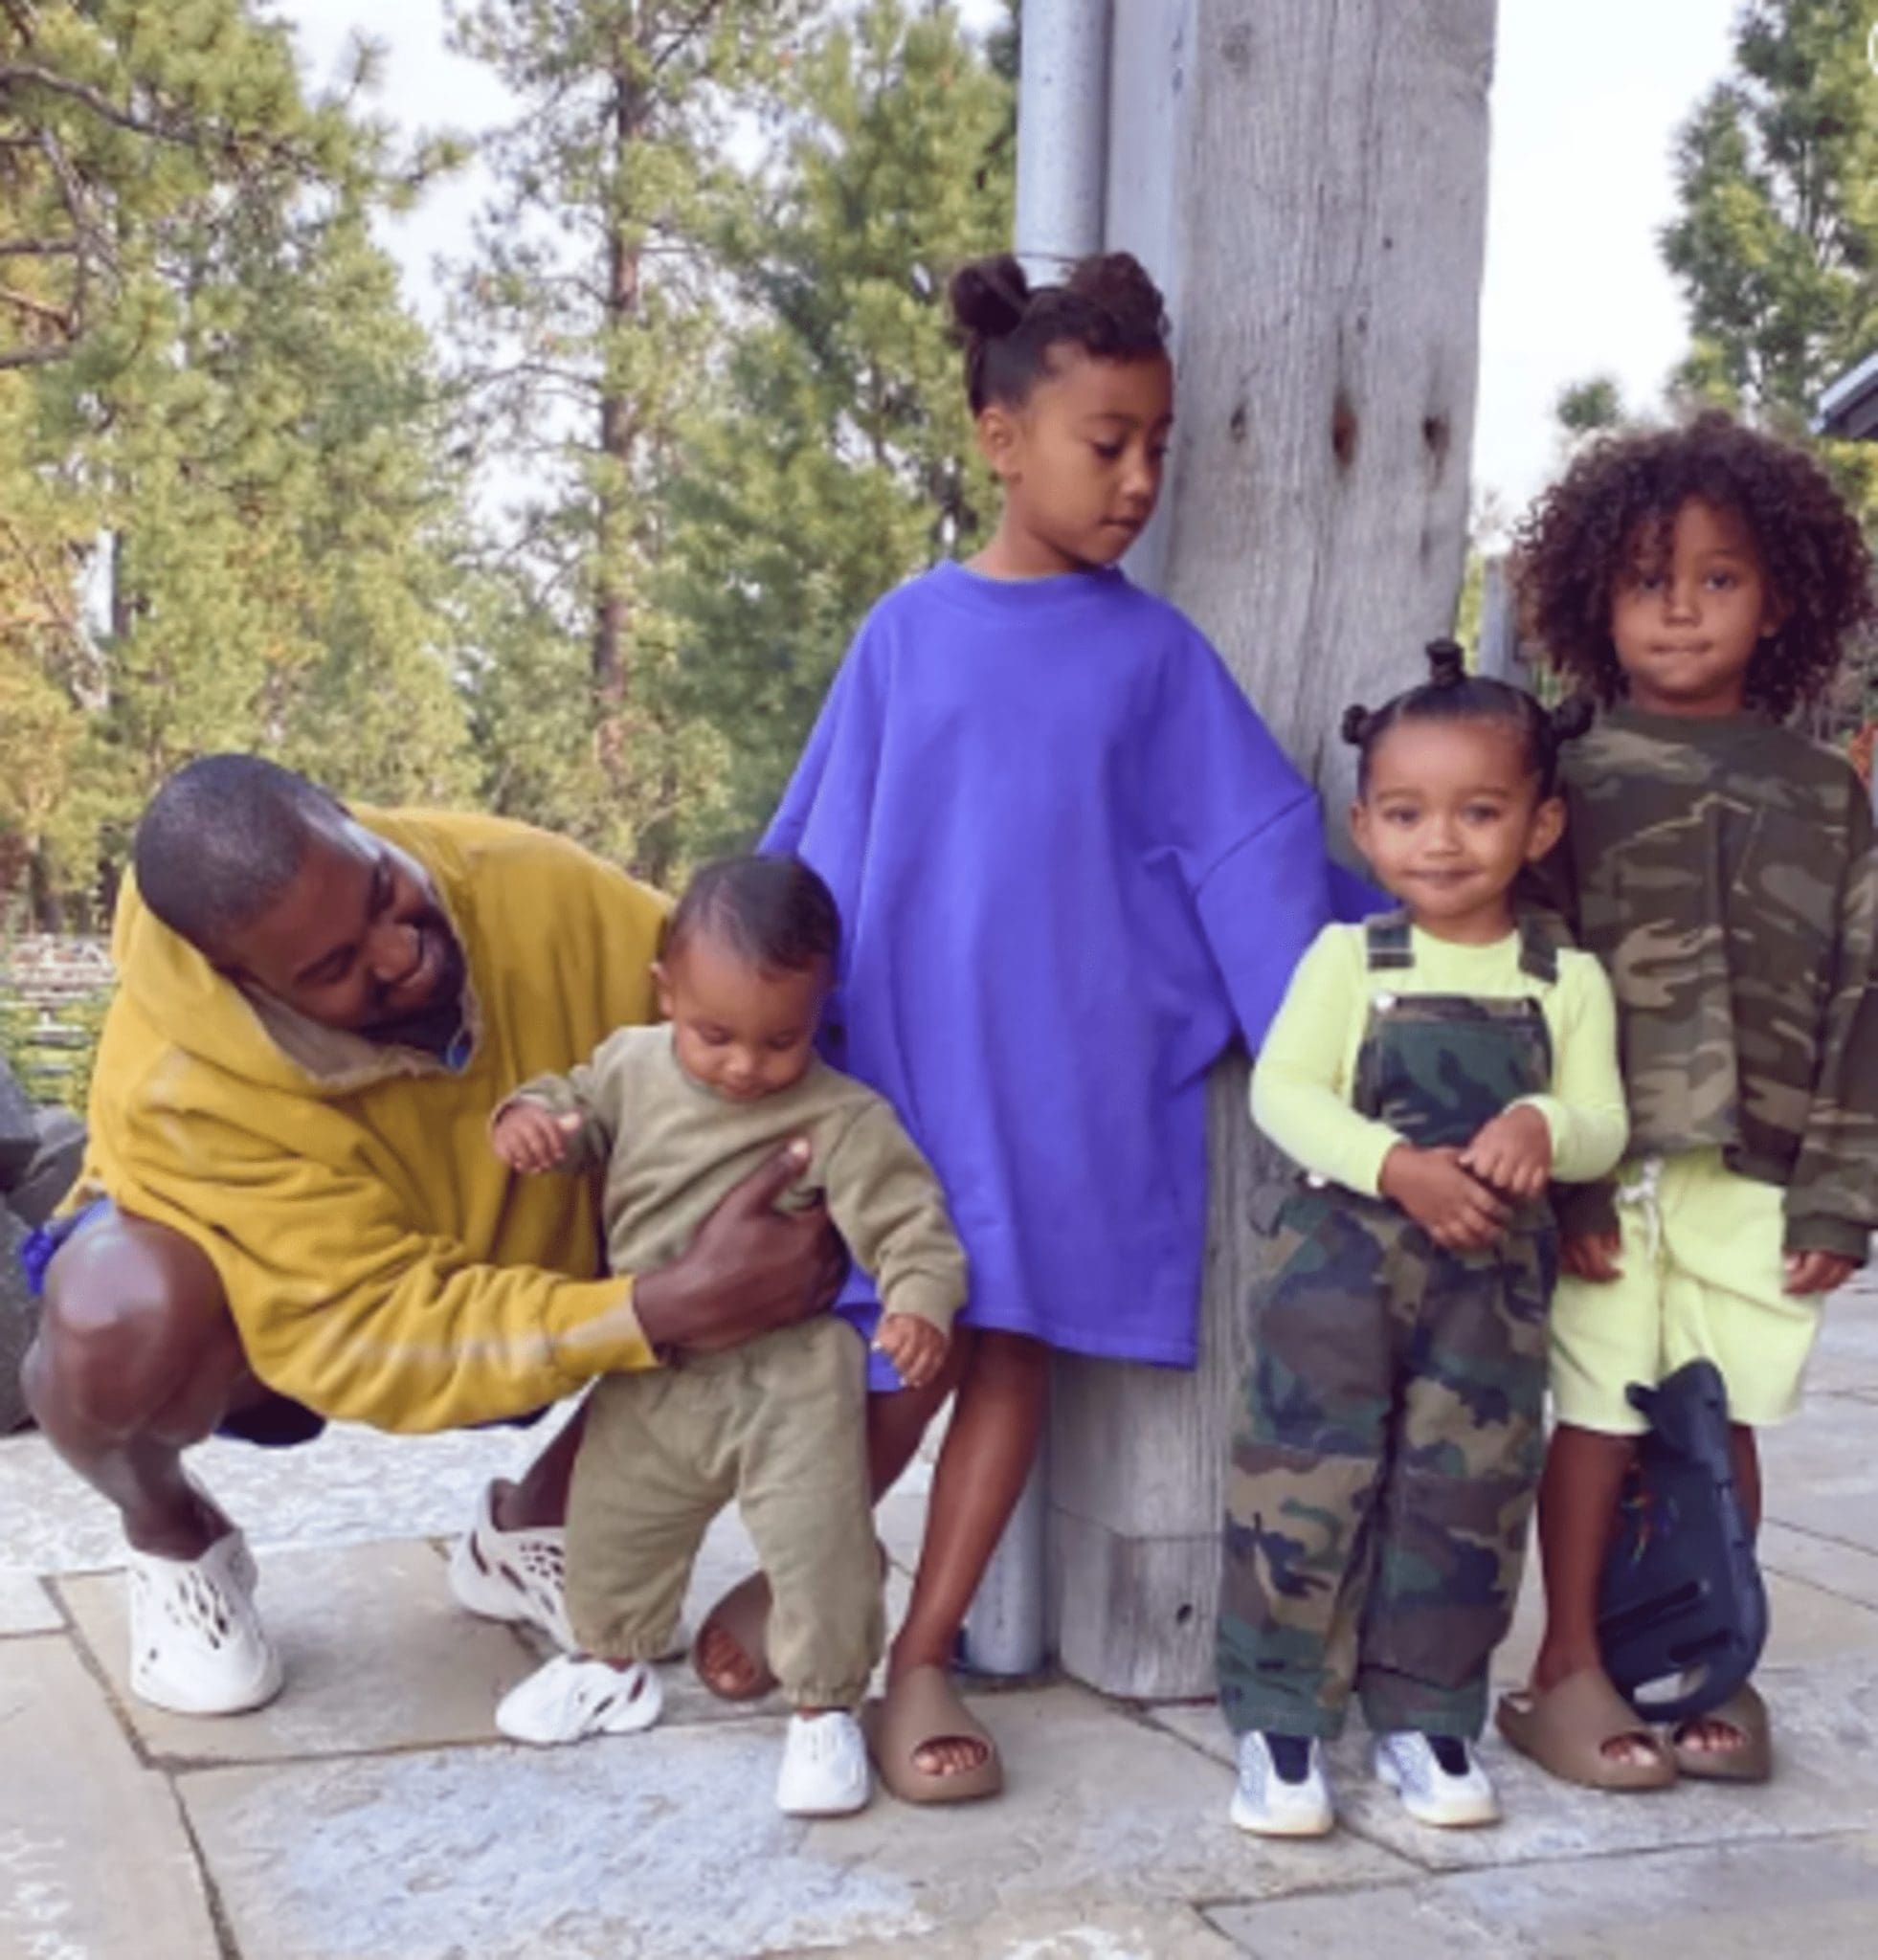 Kanye West has stated that he believes his children were sexualized by hired actors.